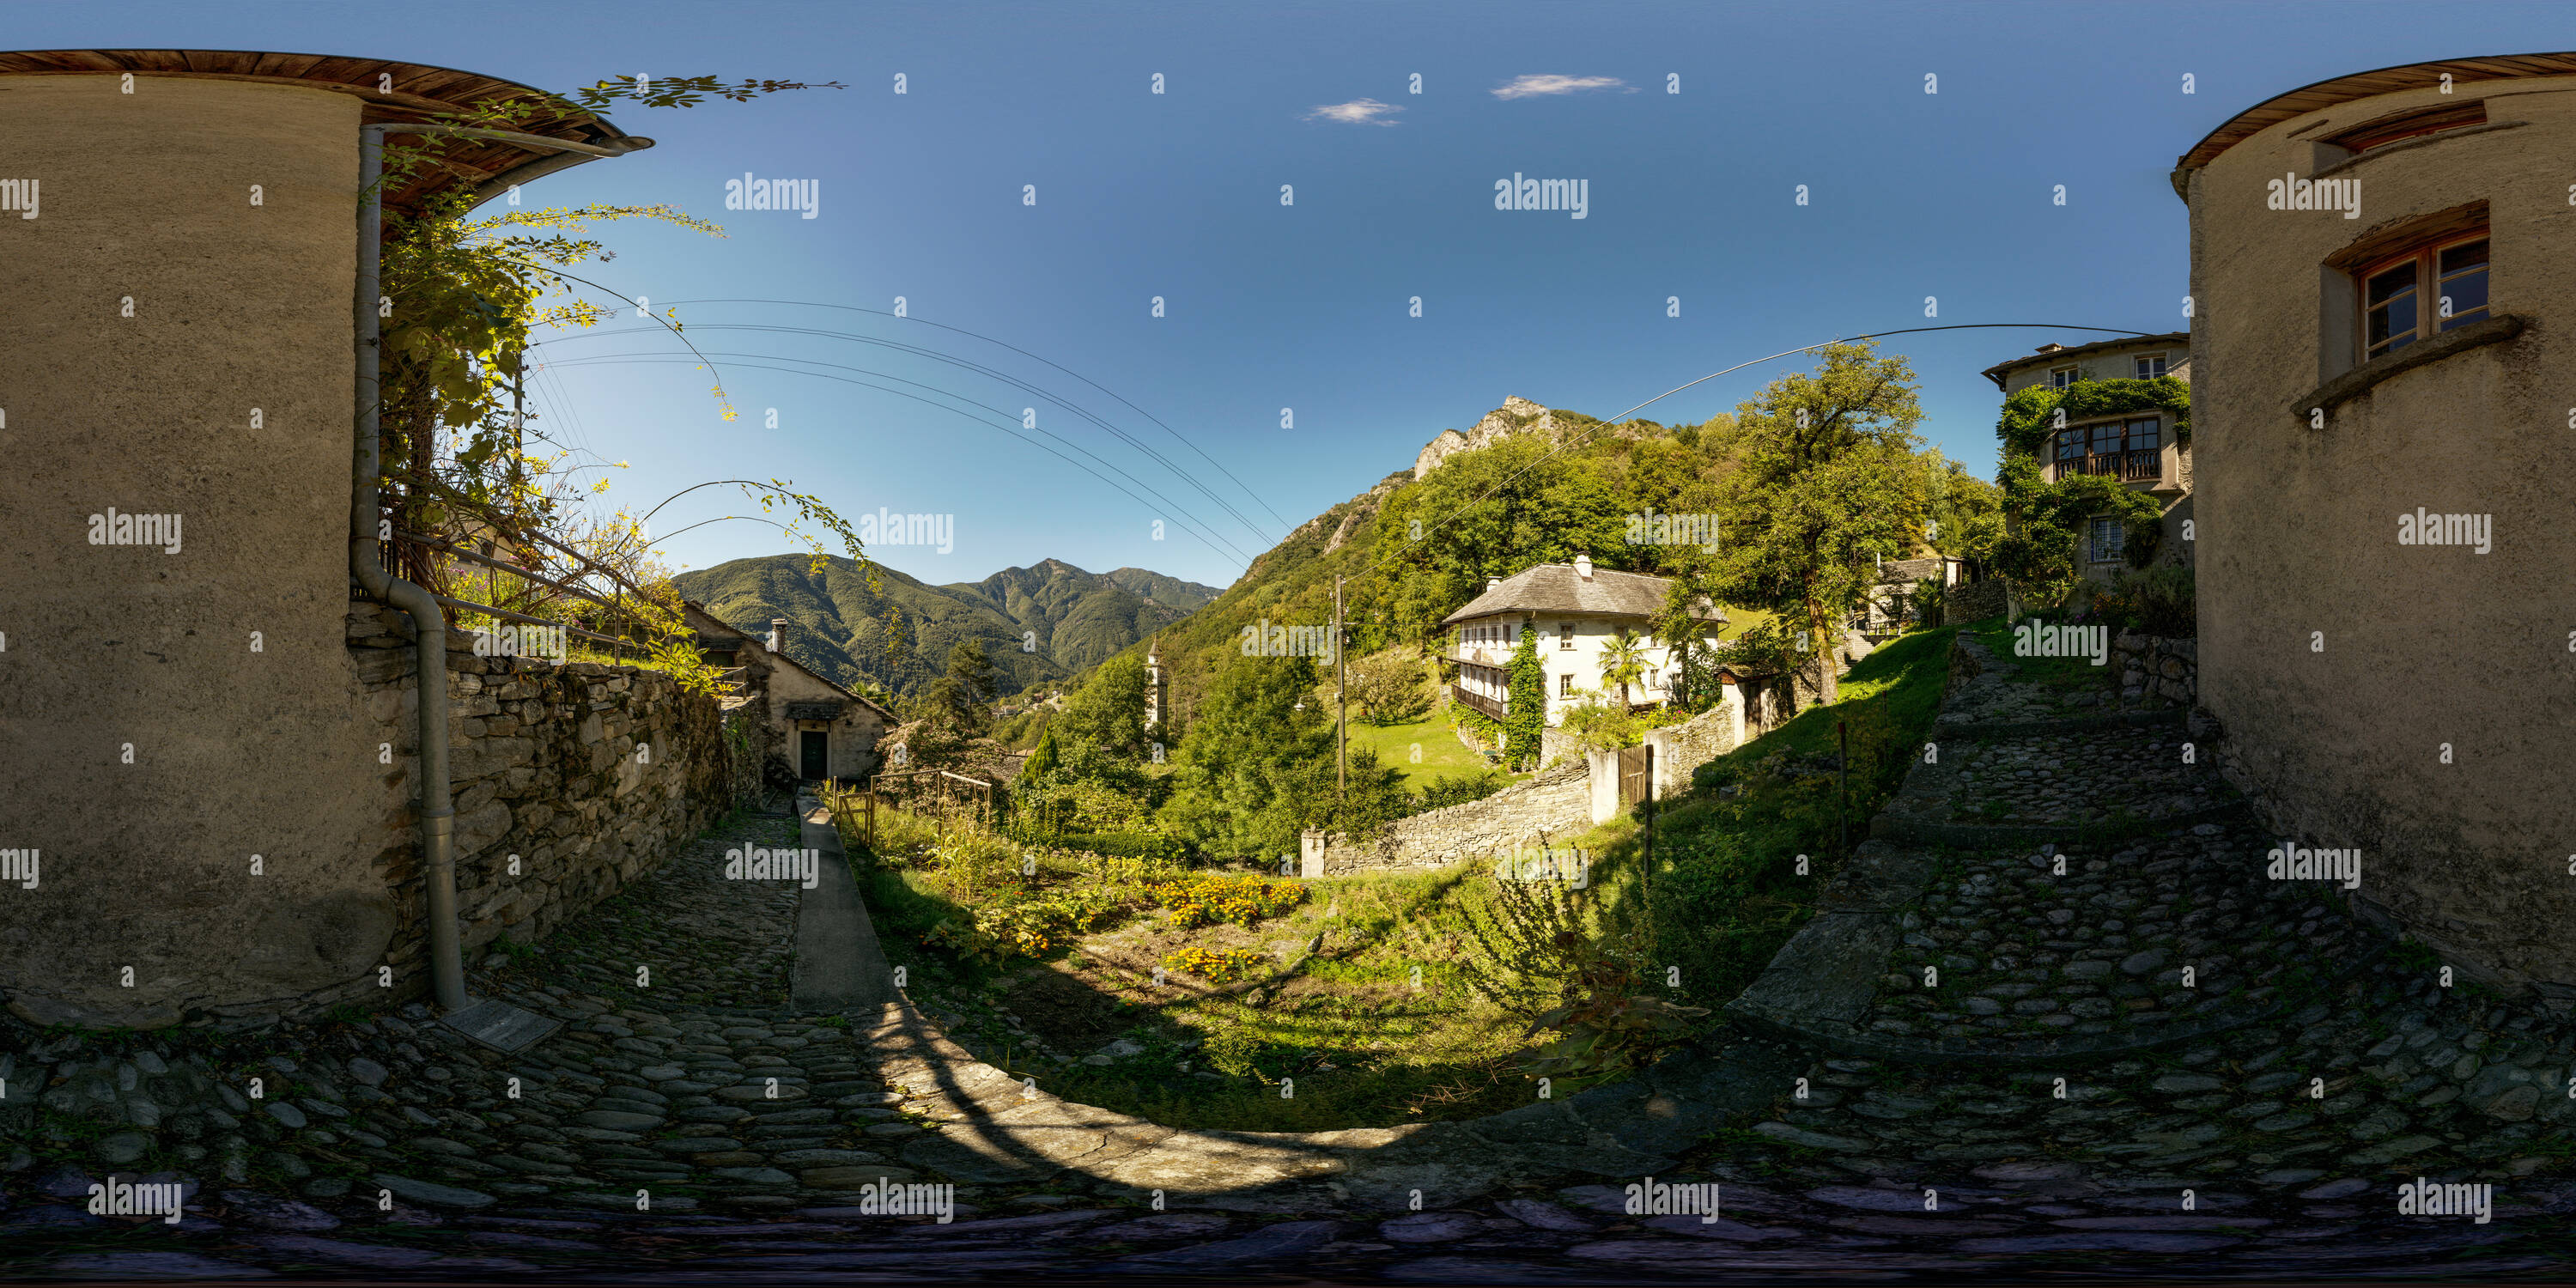 360 degree panoramic view of Berzone in the Onsernone Valley